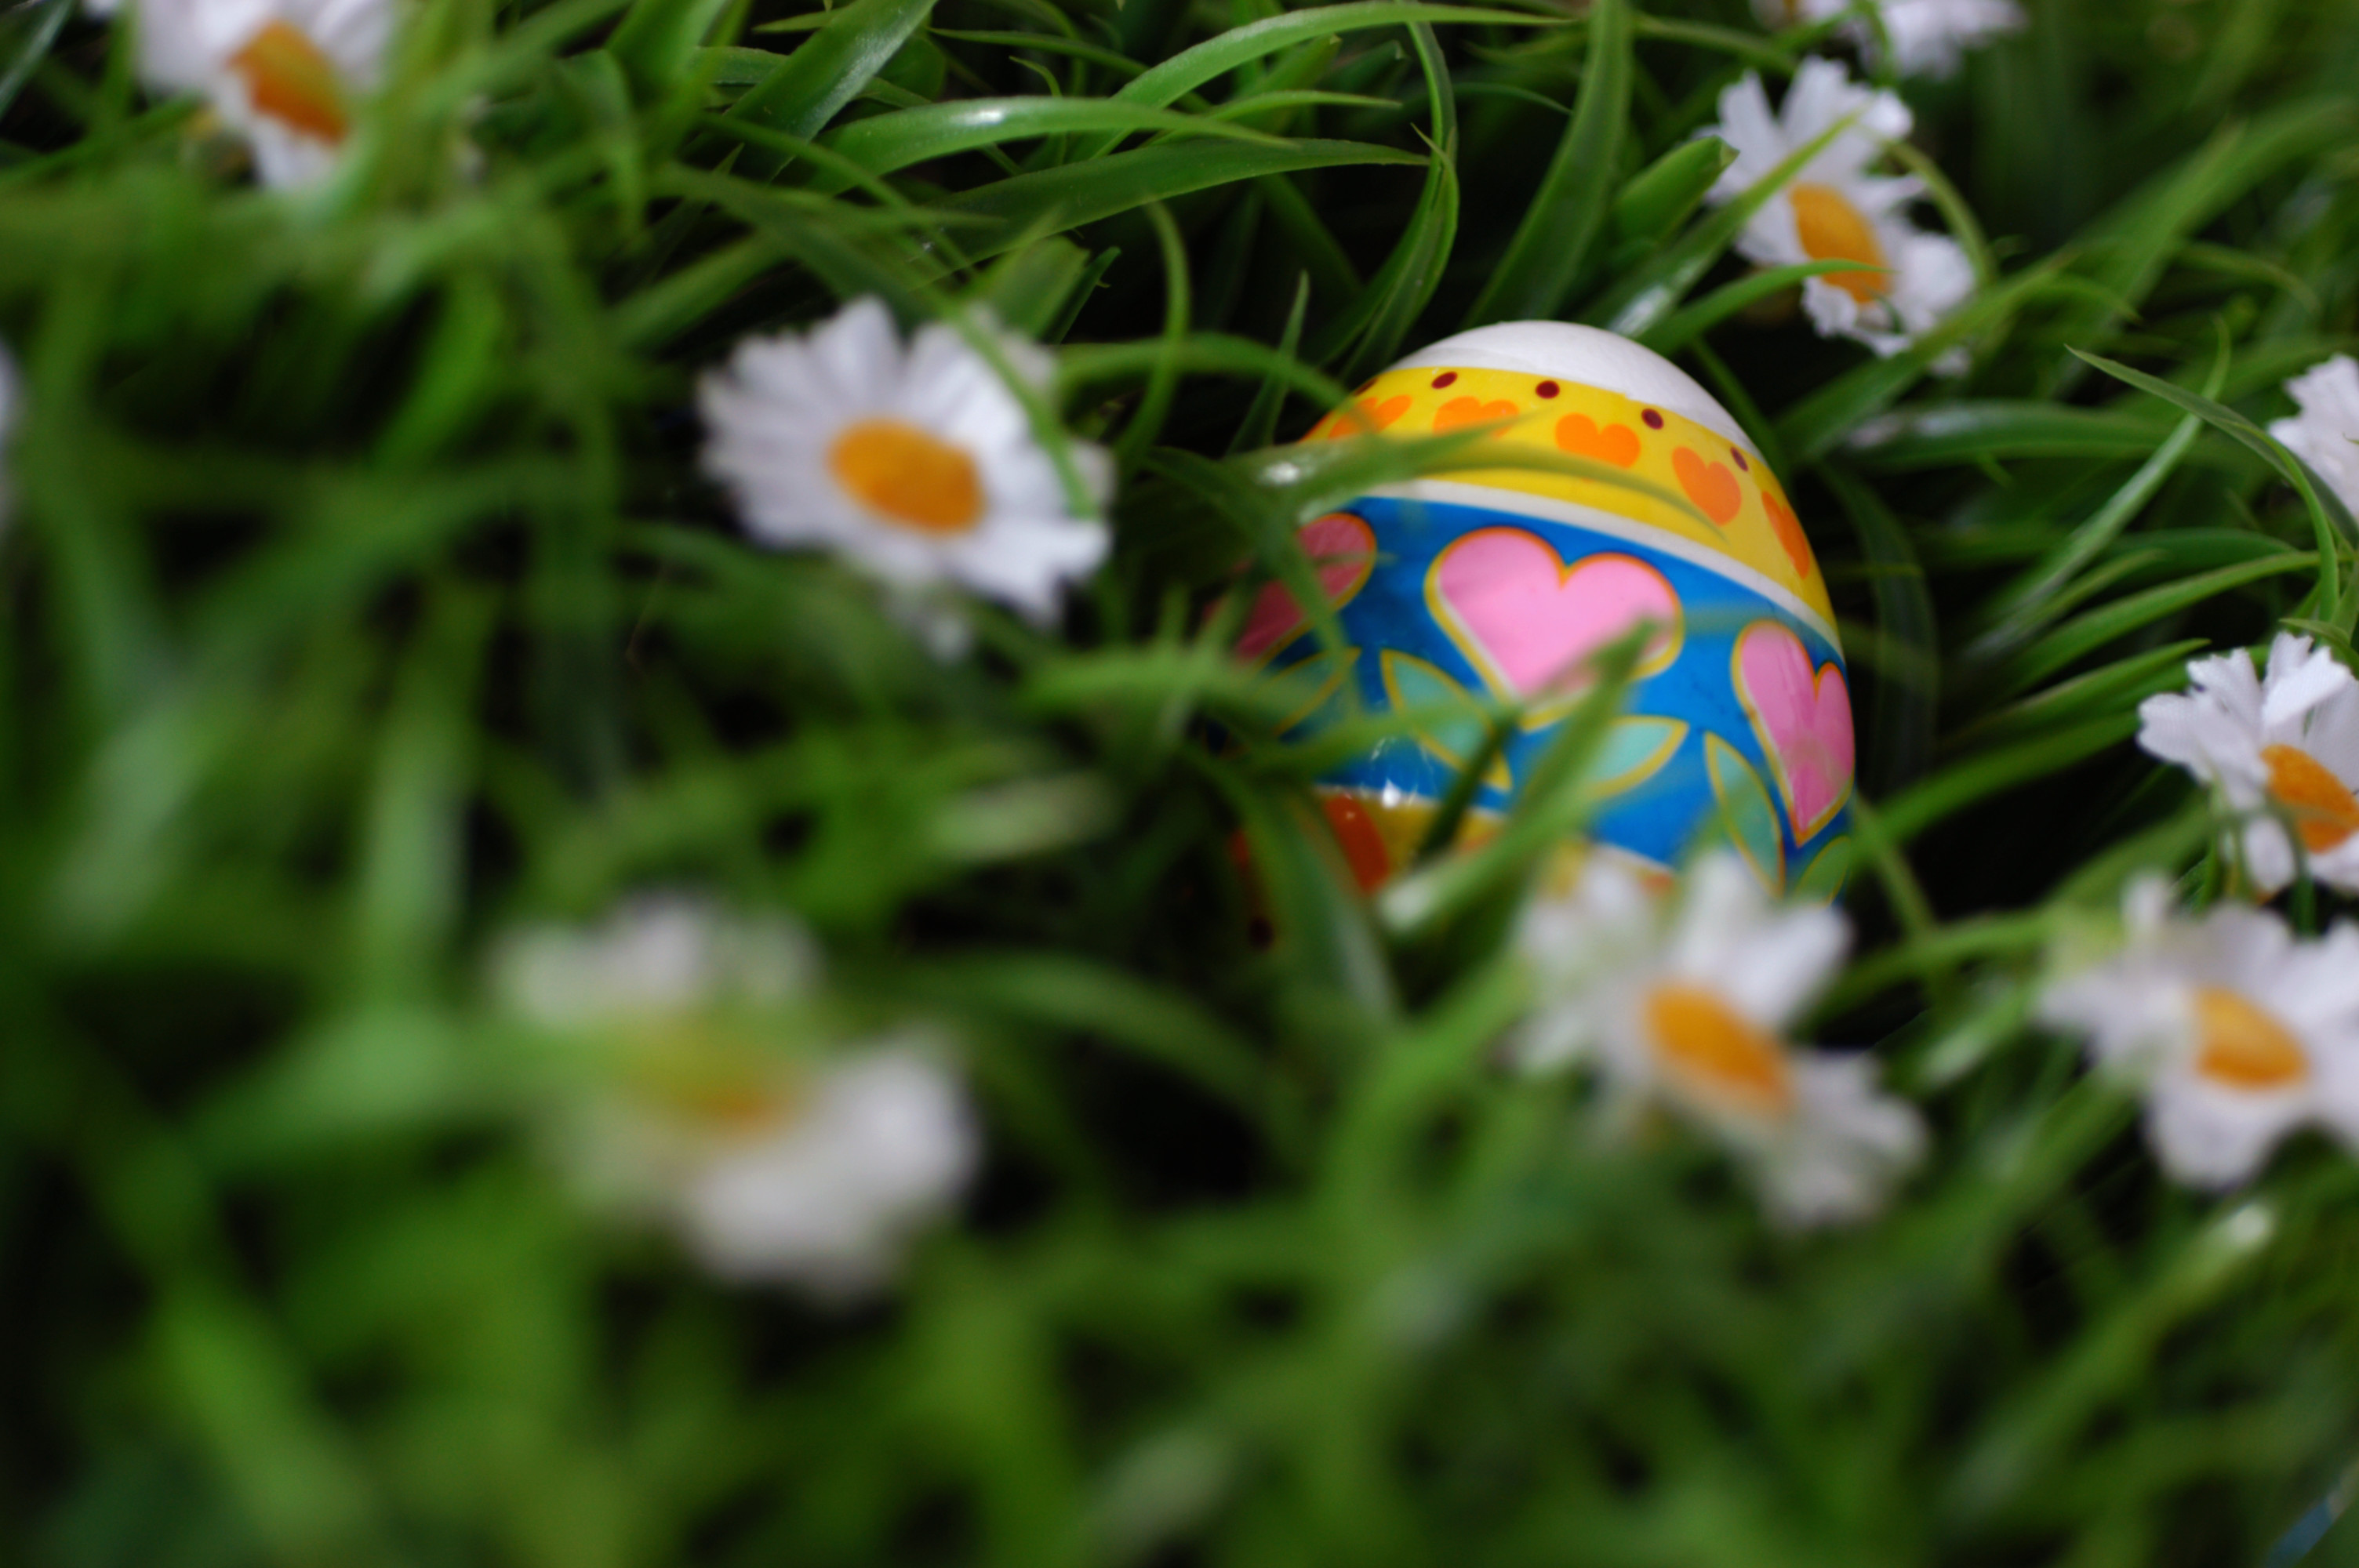 Painted egg in the grass